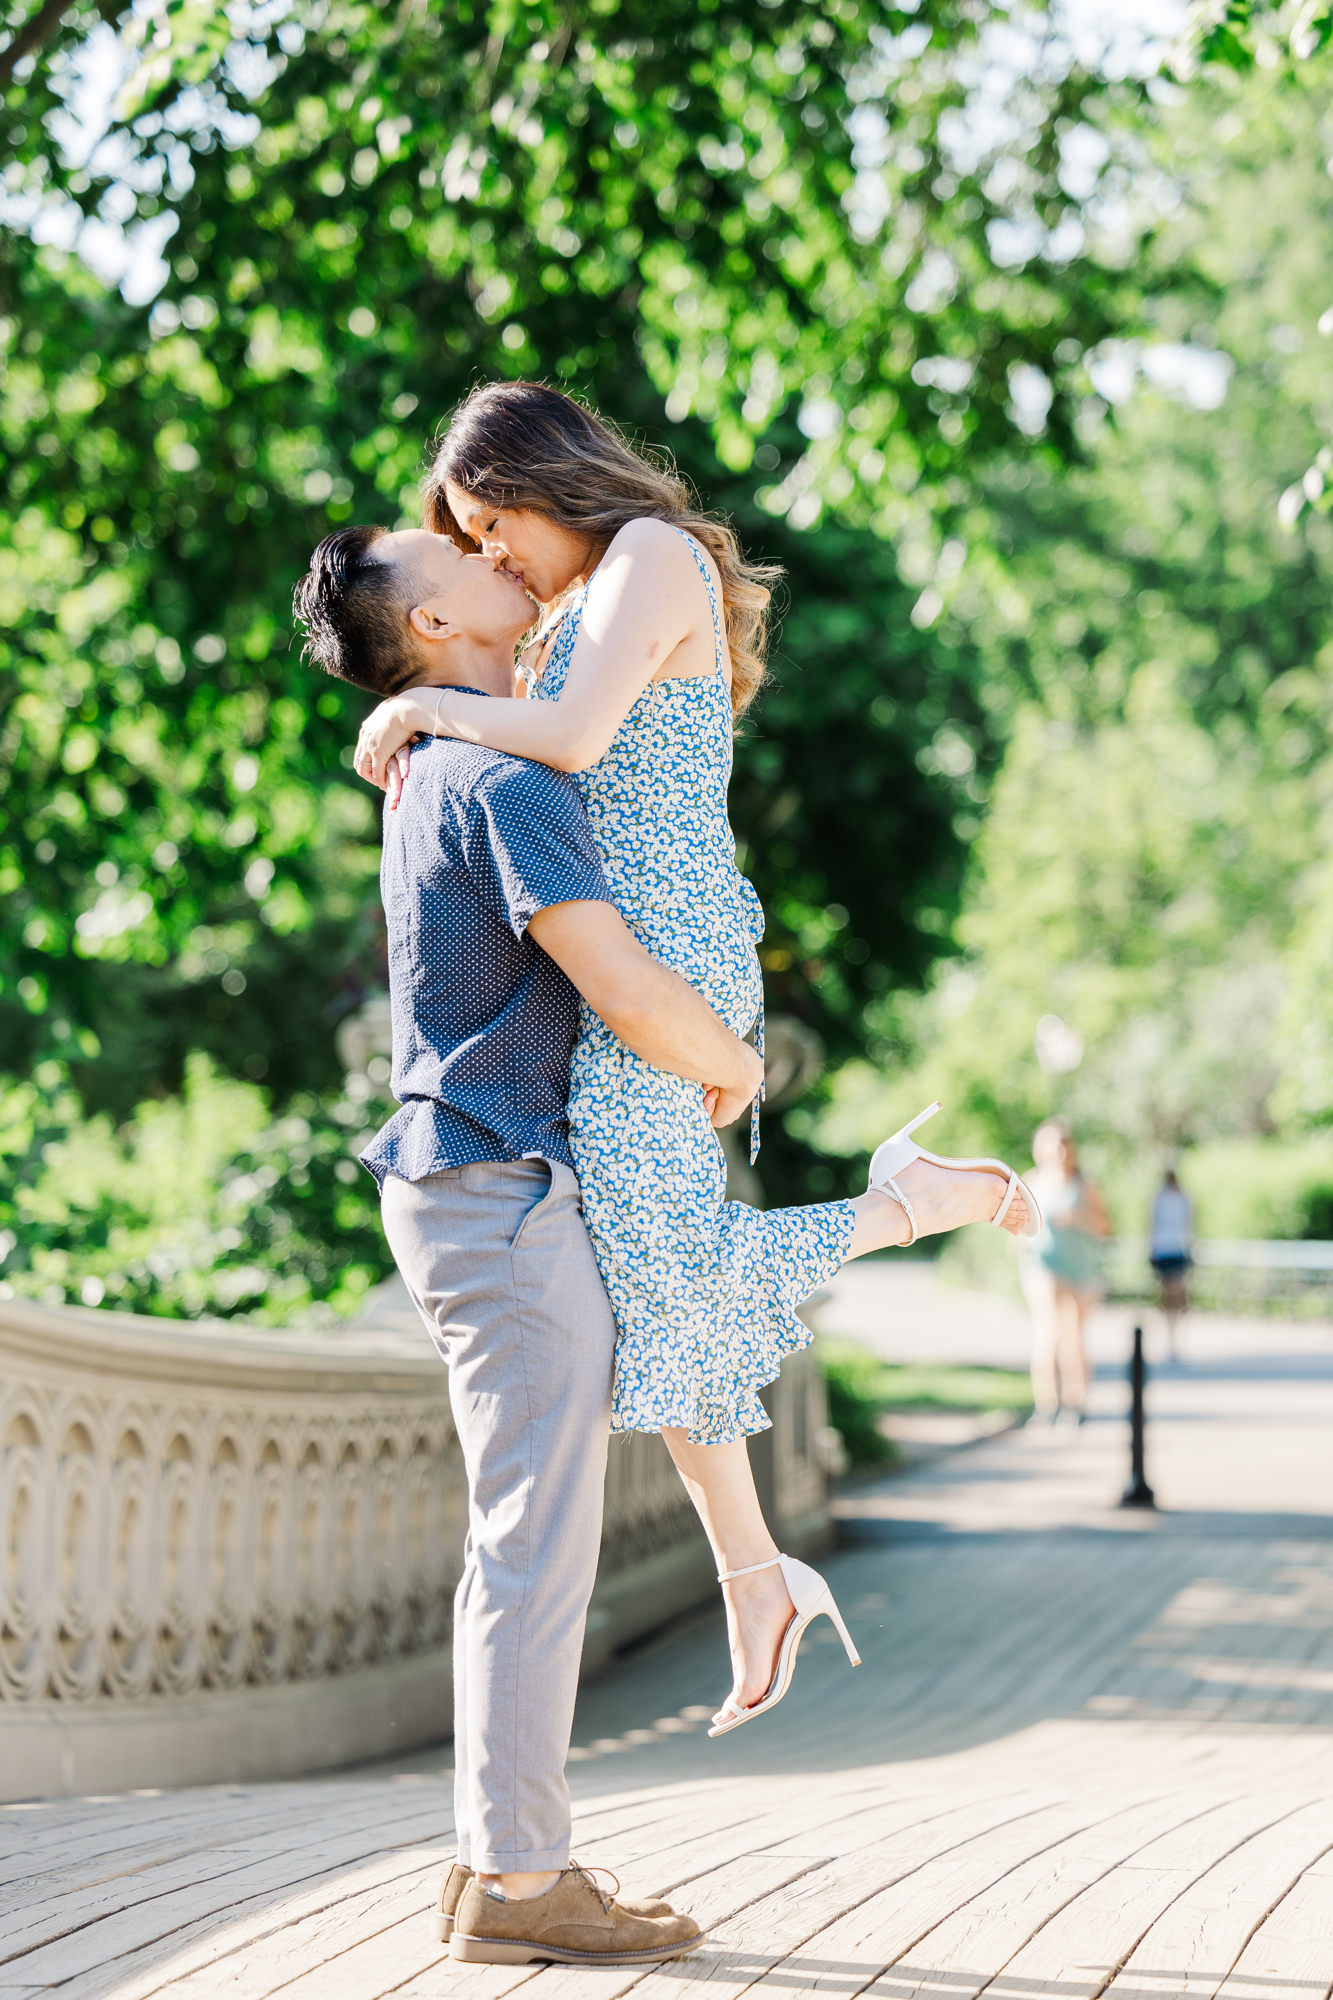 Gorgeous Engagement Photos in Central Park, New York